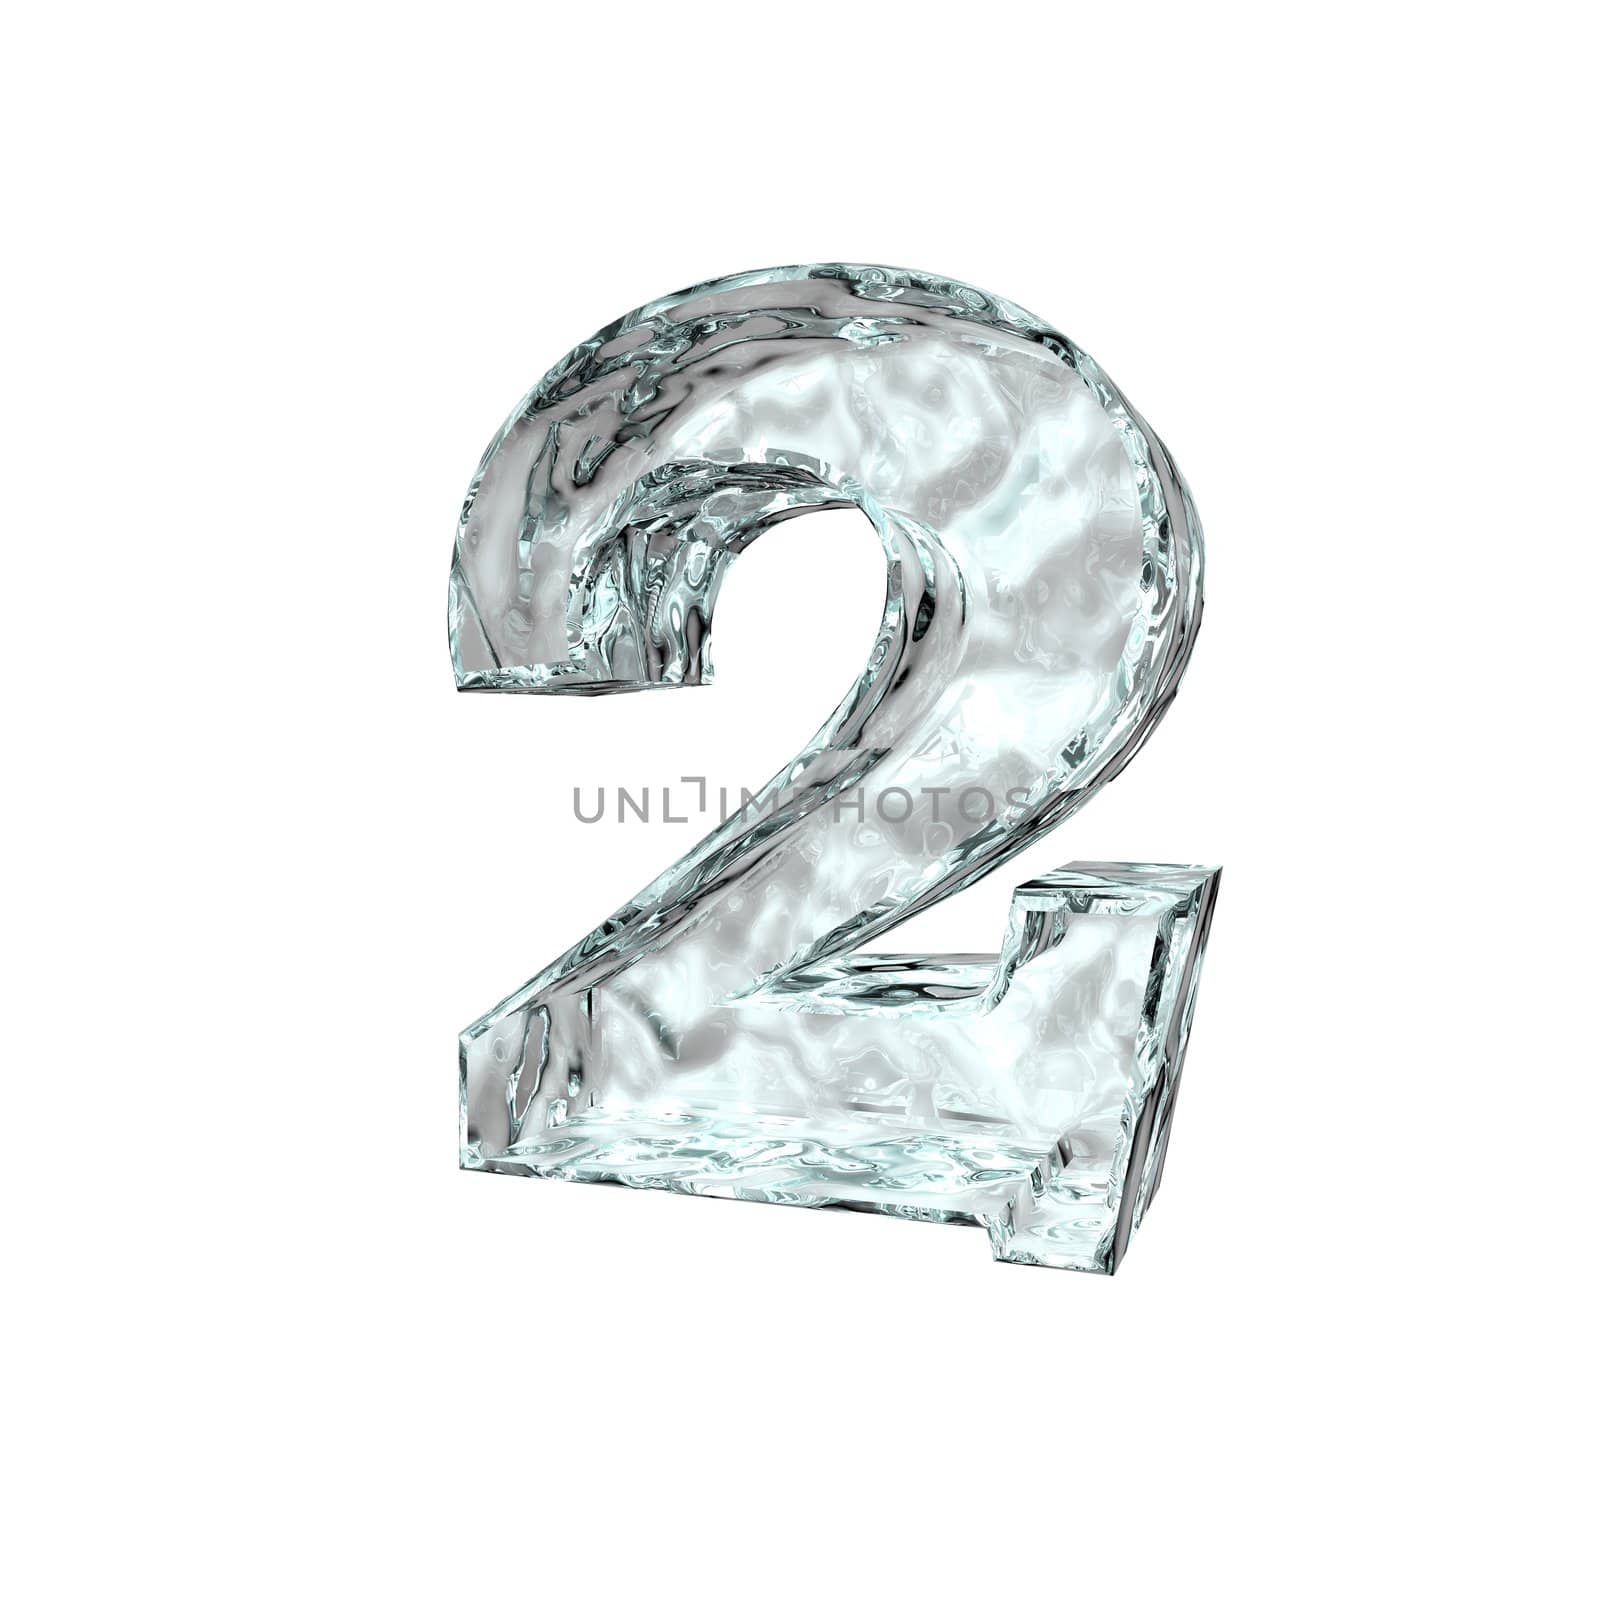 frozen number two on white background - 3d illustration